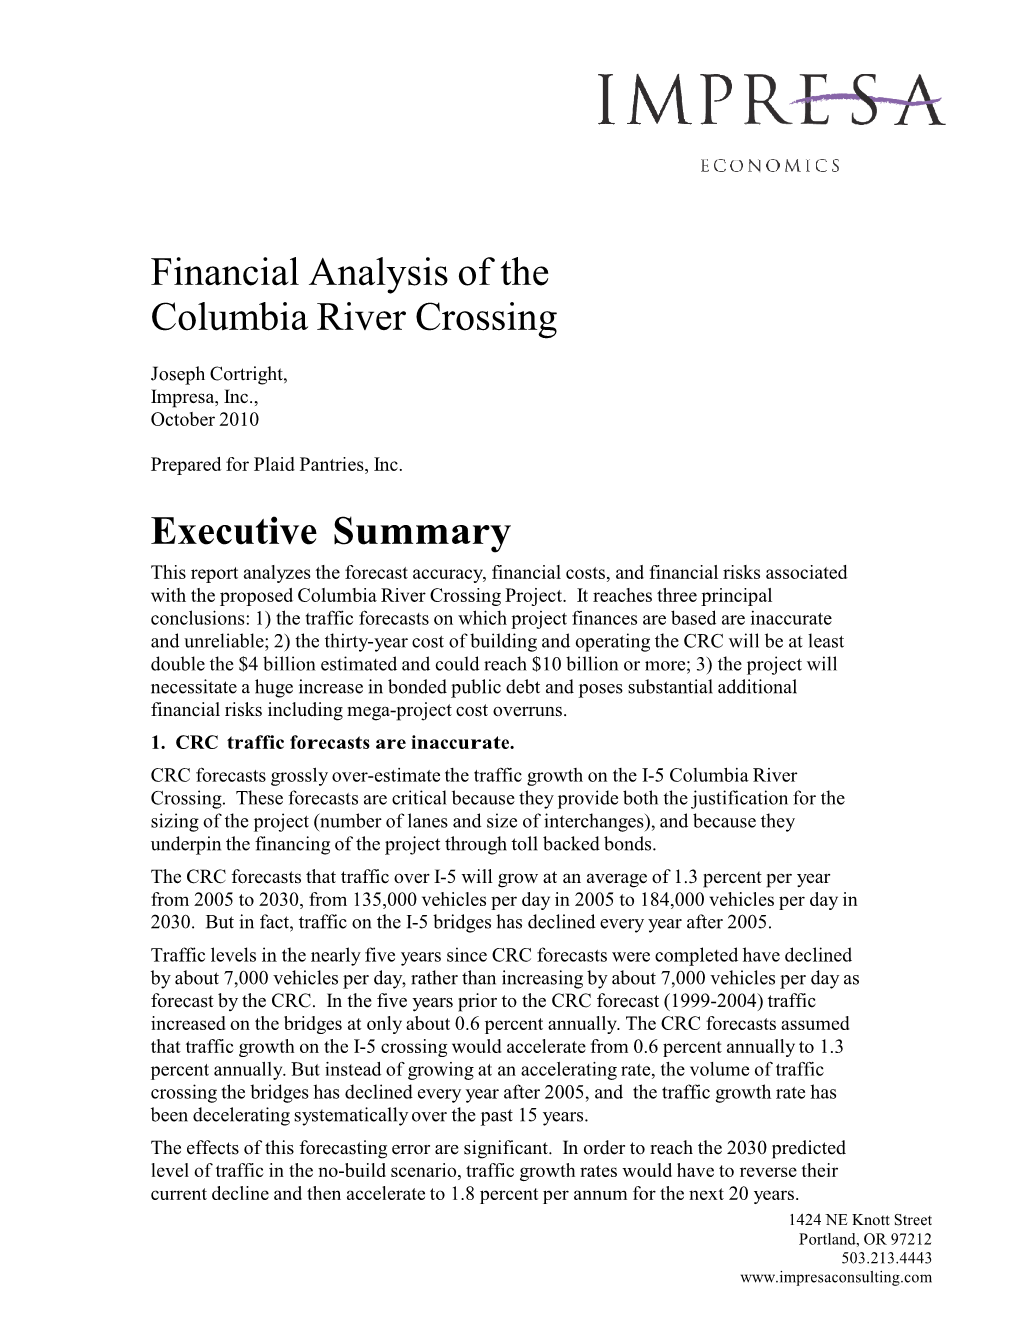 Financial Analysis of the Columbia River Crossing Executive Summary